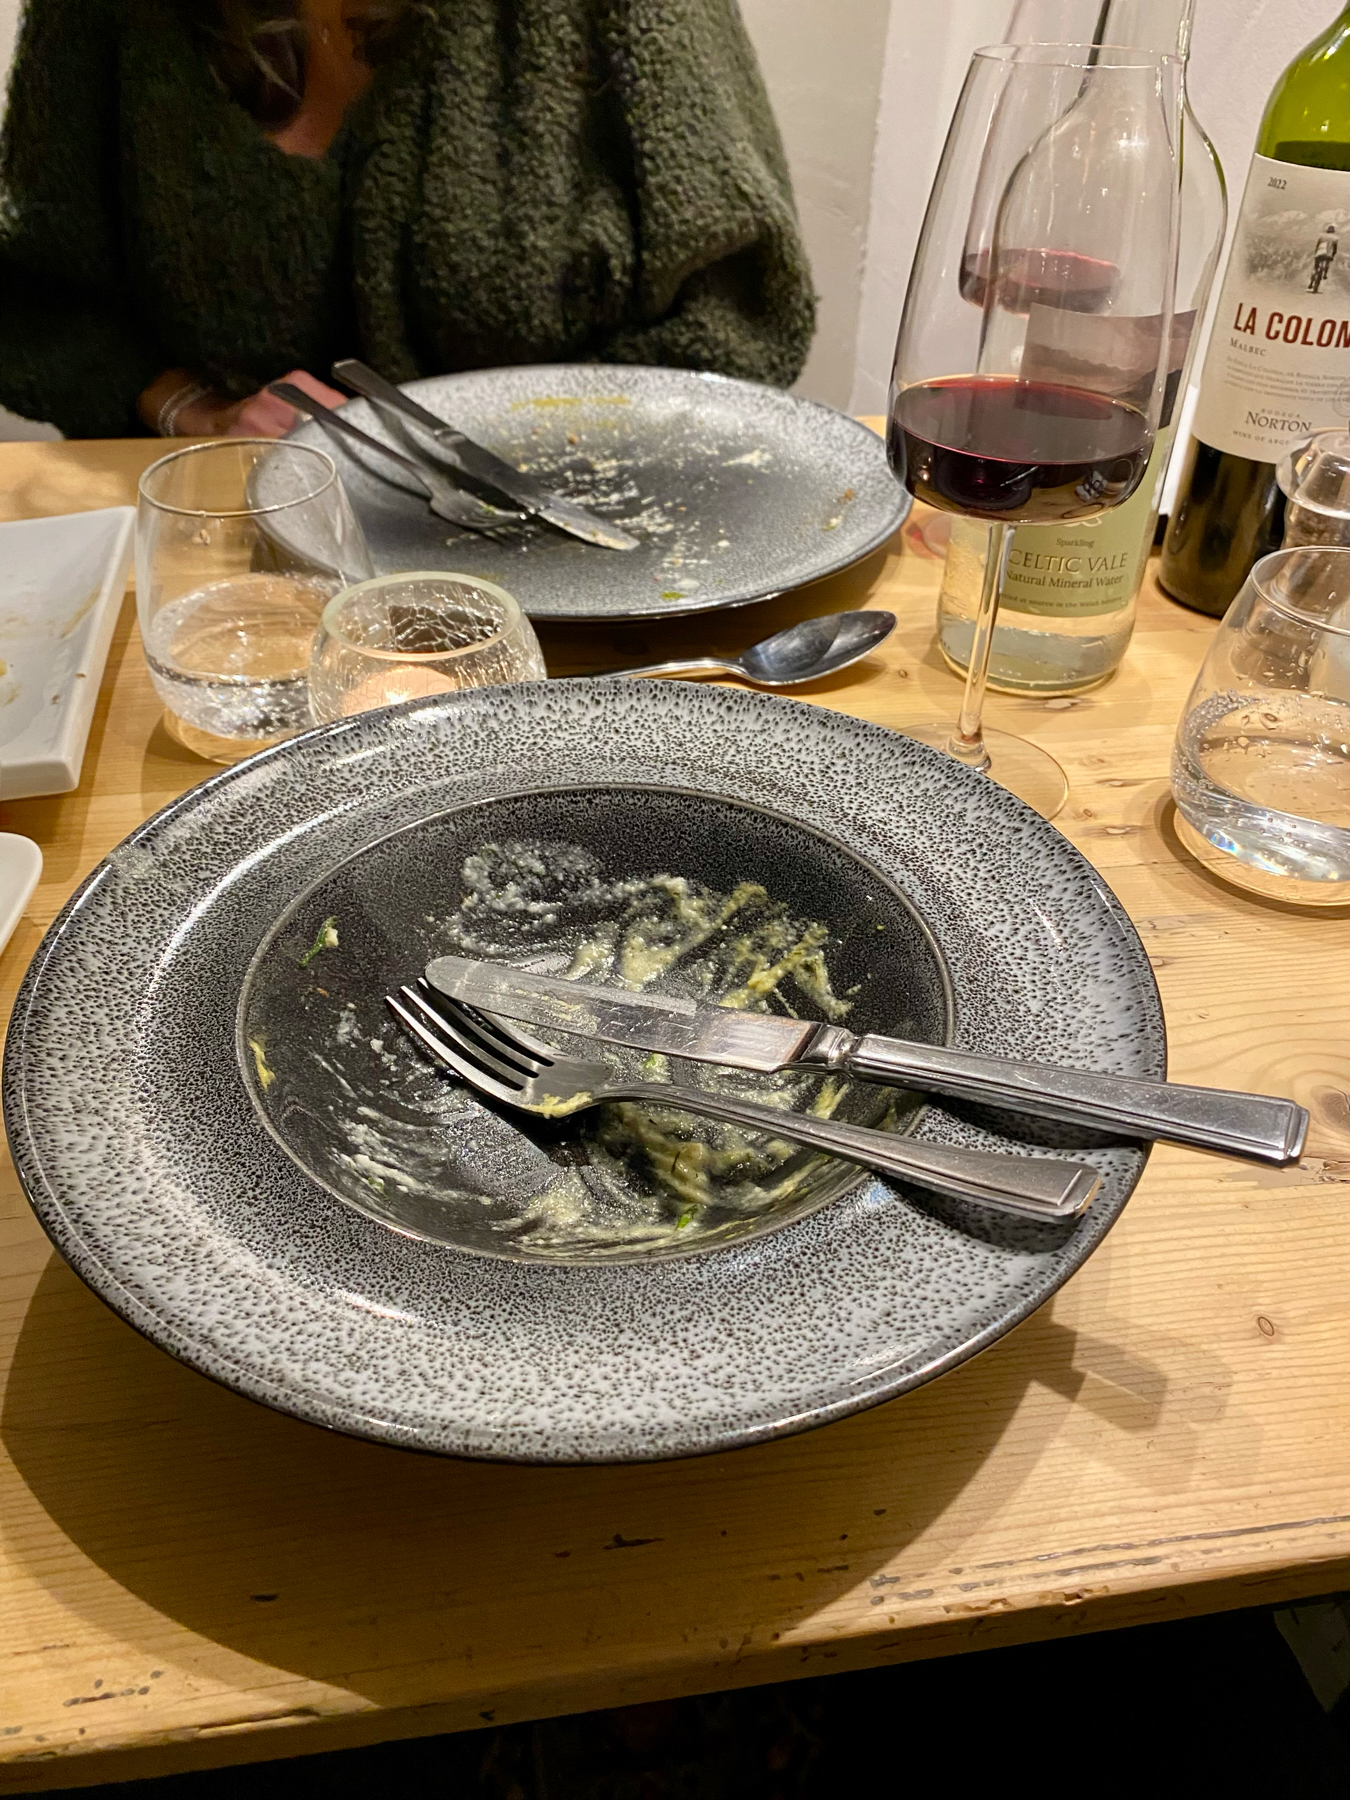 A nearly empty speckled dinner plate with remnants of food and a pair of crossed utensils on it, resting on a wooden table, surrounded by a half-empty wine glass, water glasses, and a wine bottle